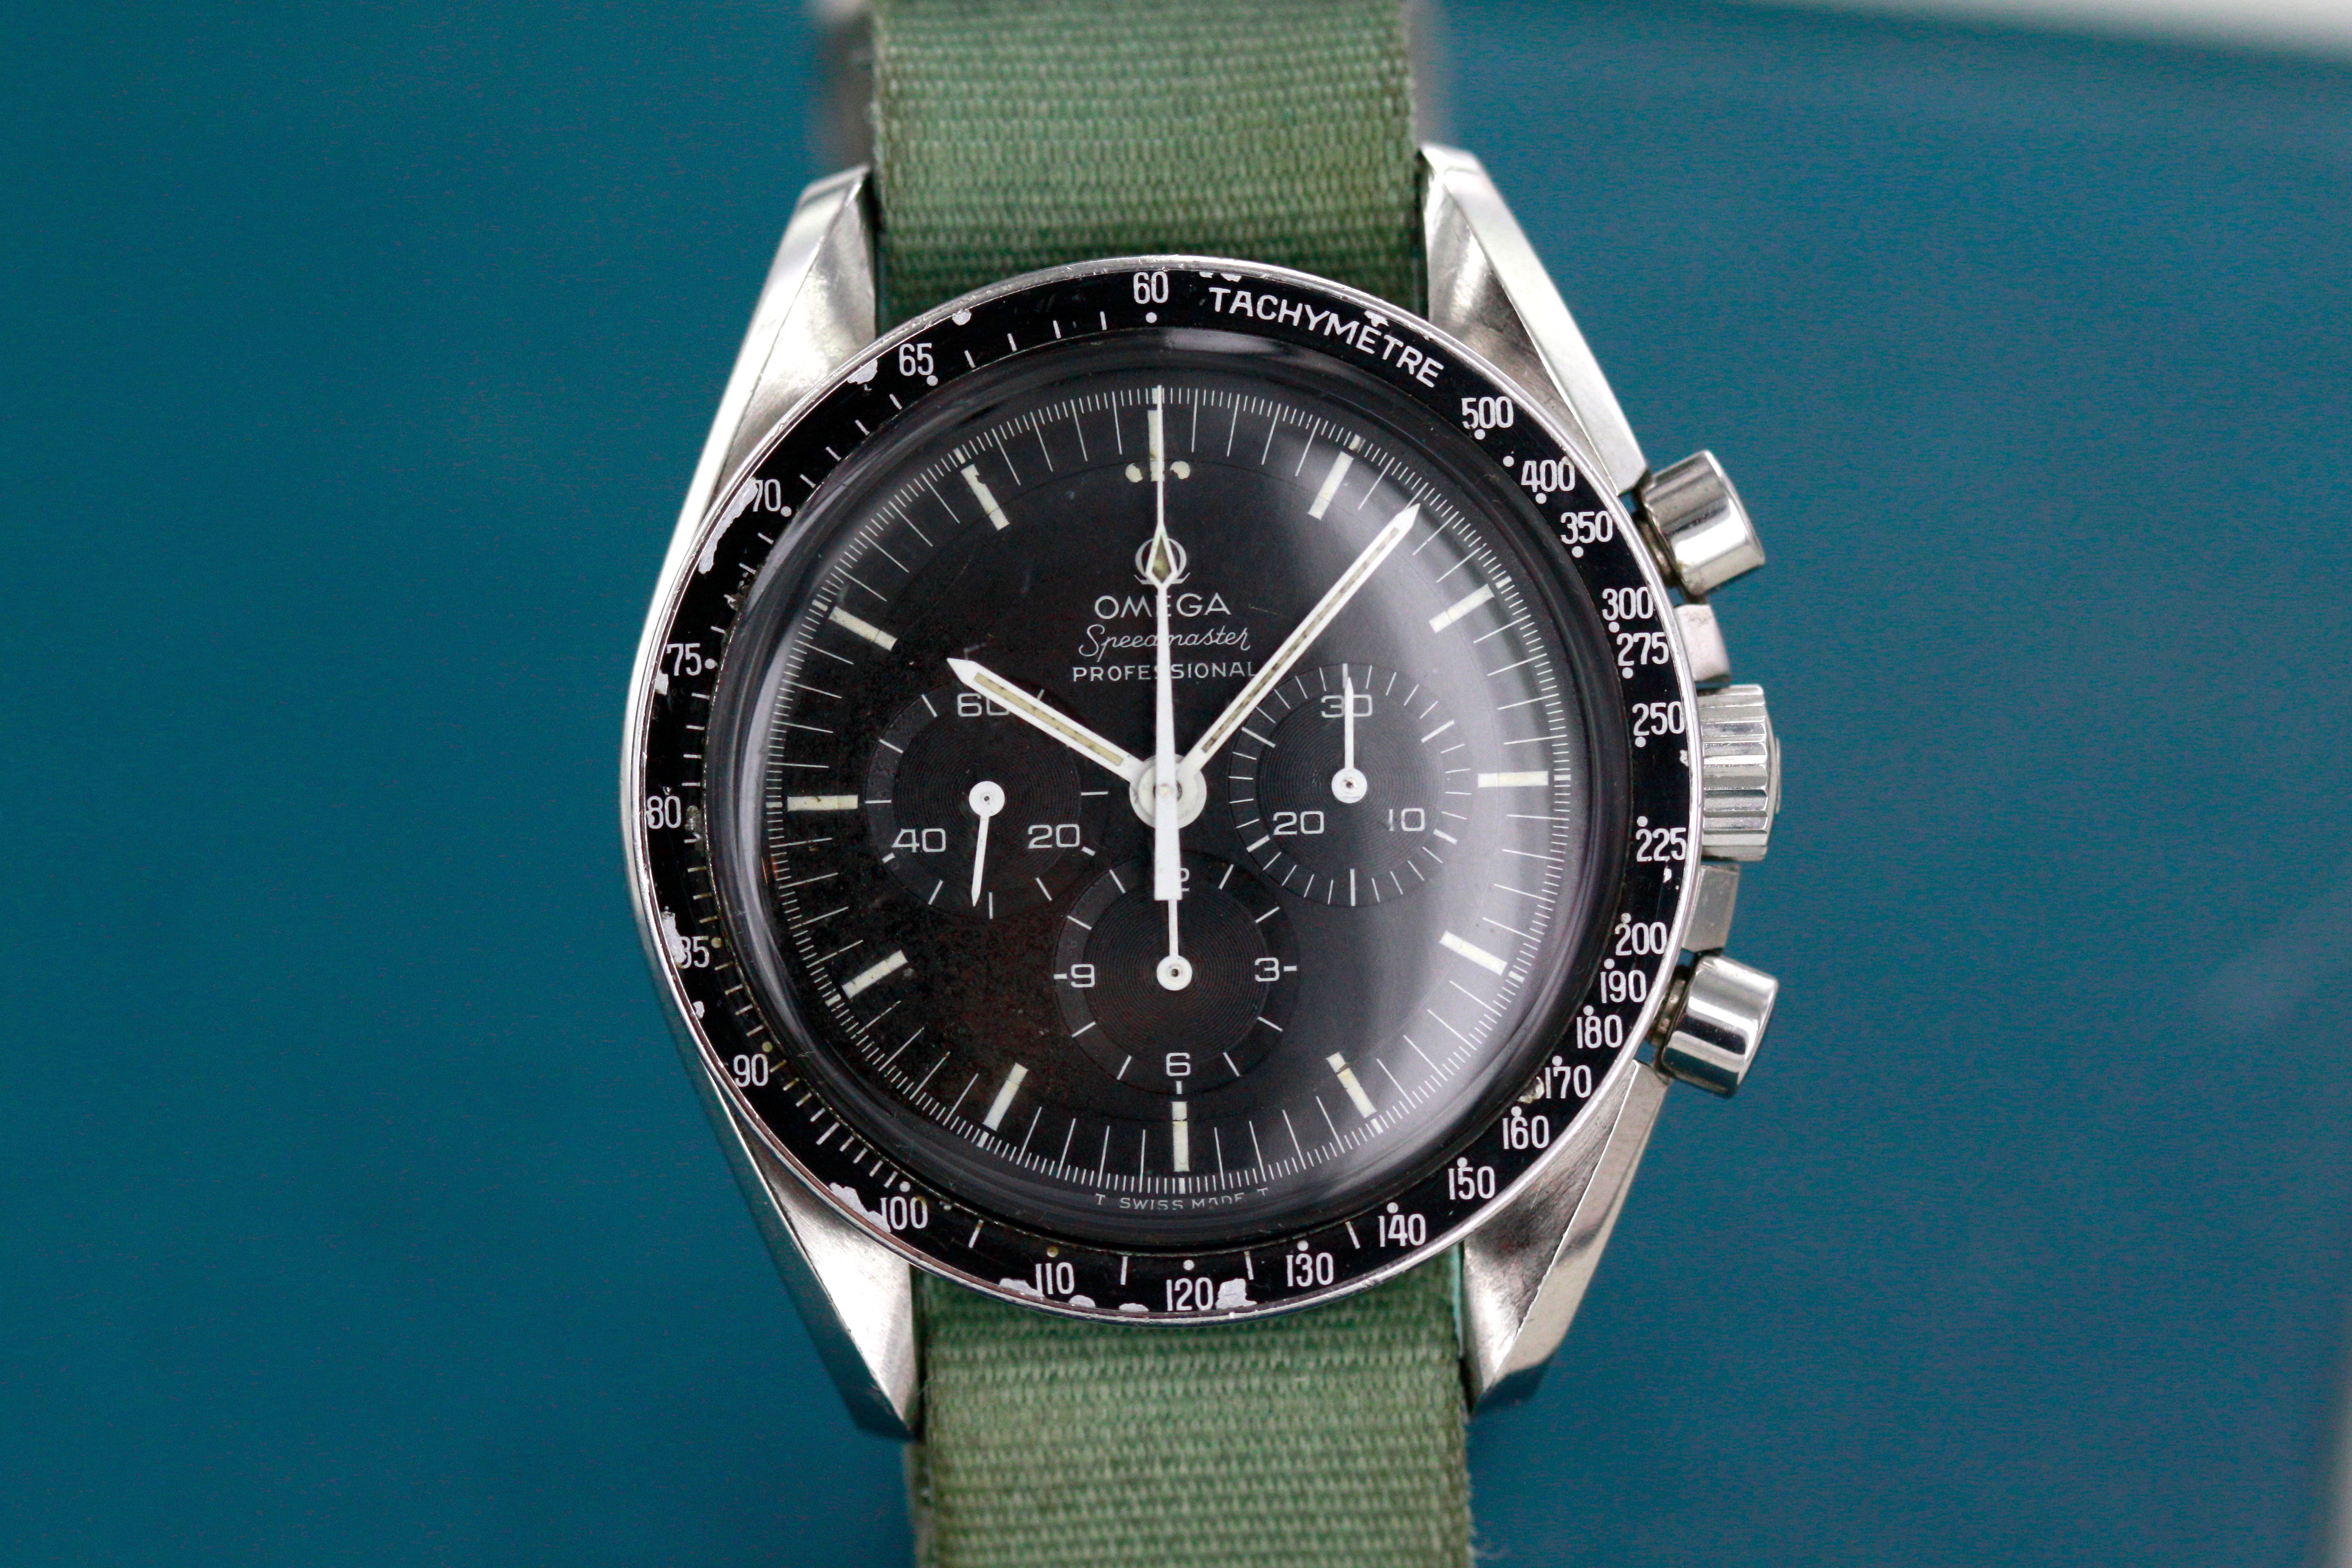 Omega Speedmaster Neil Armstrong - Moonwatch 145022 69ST with 861 Caliber